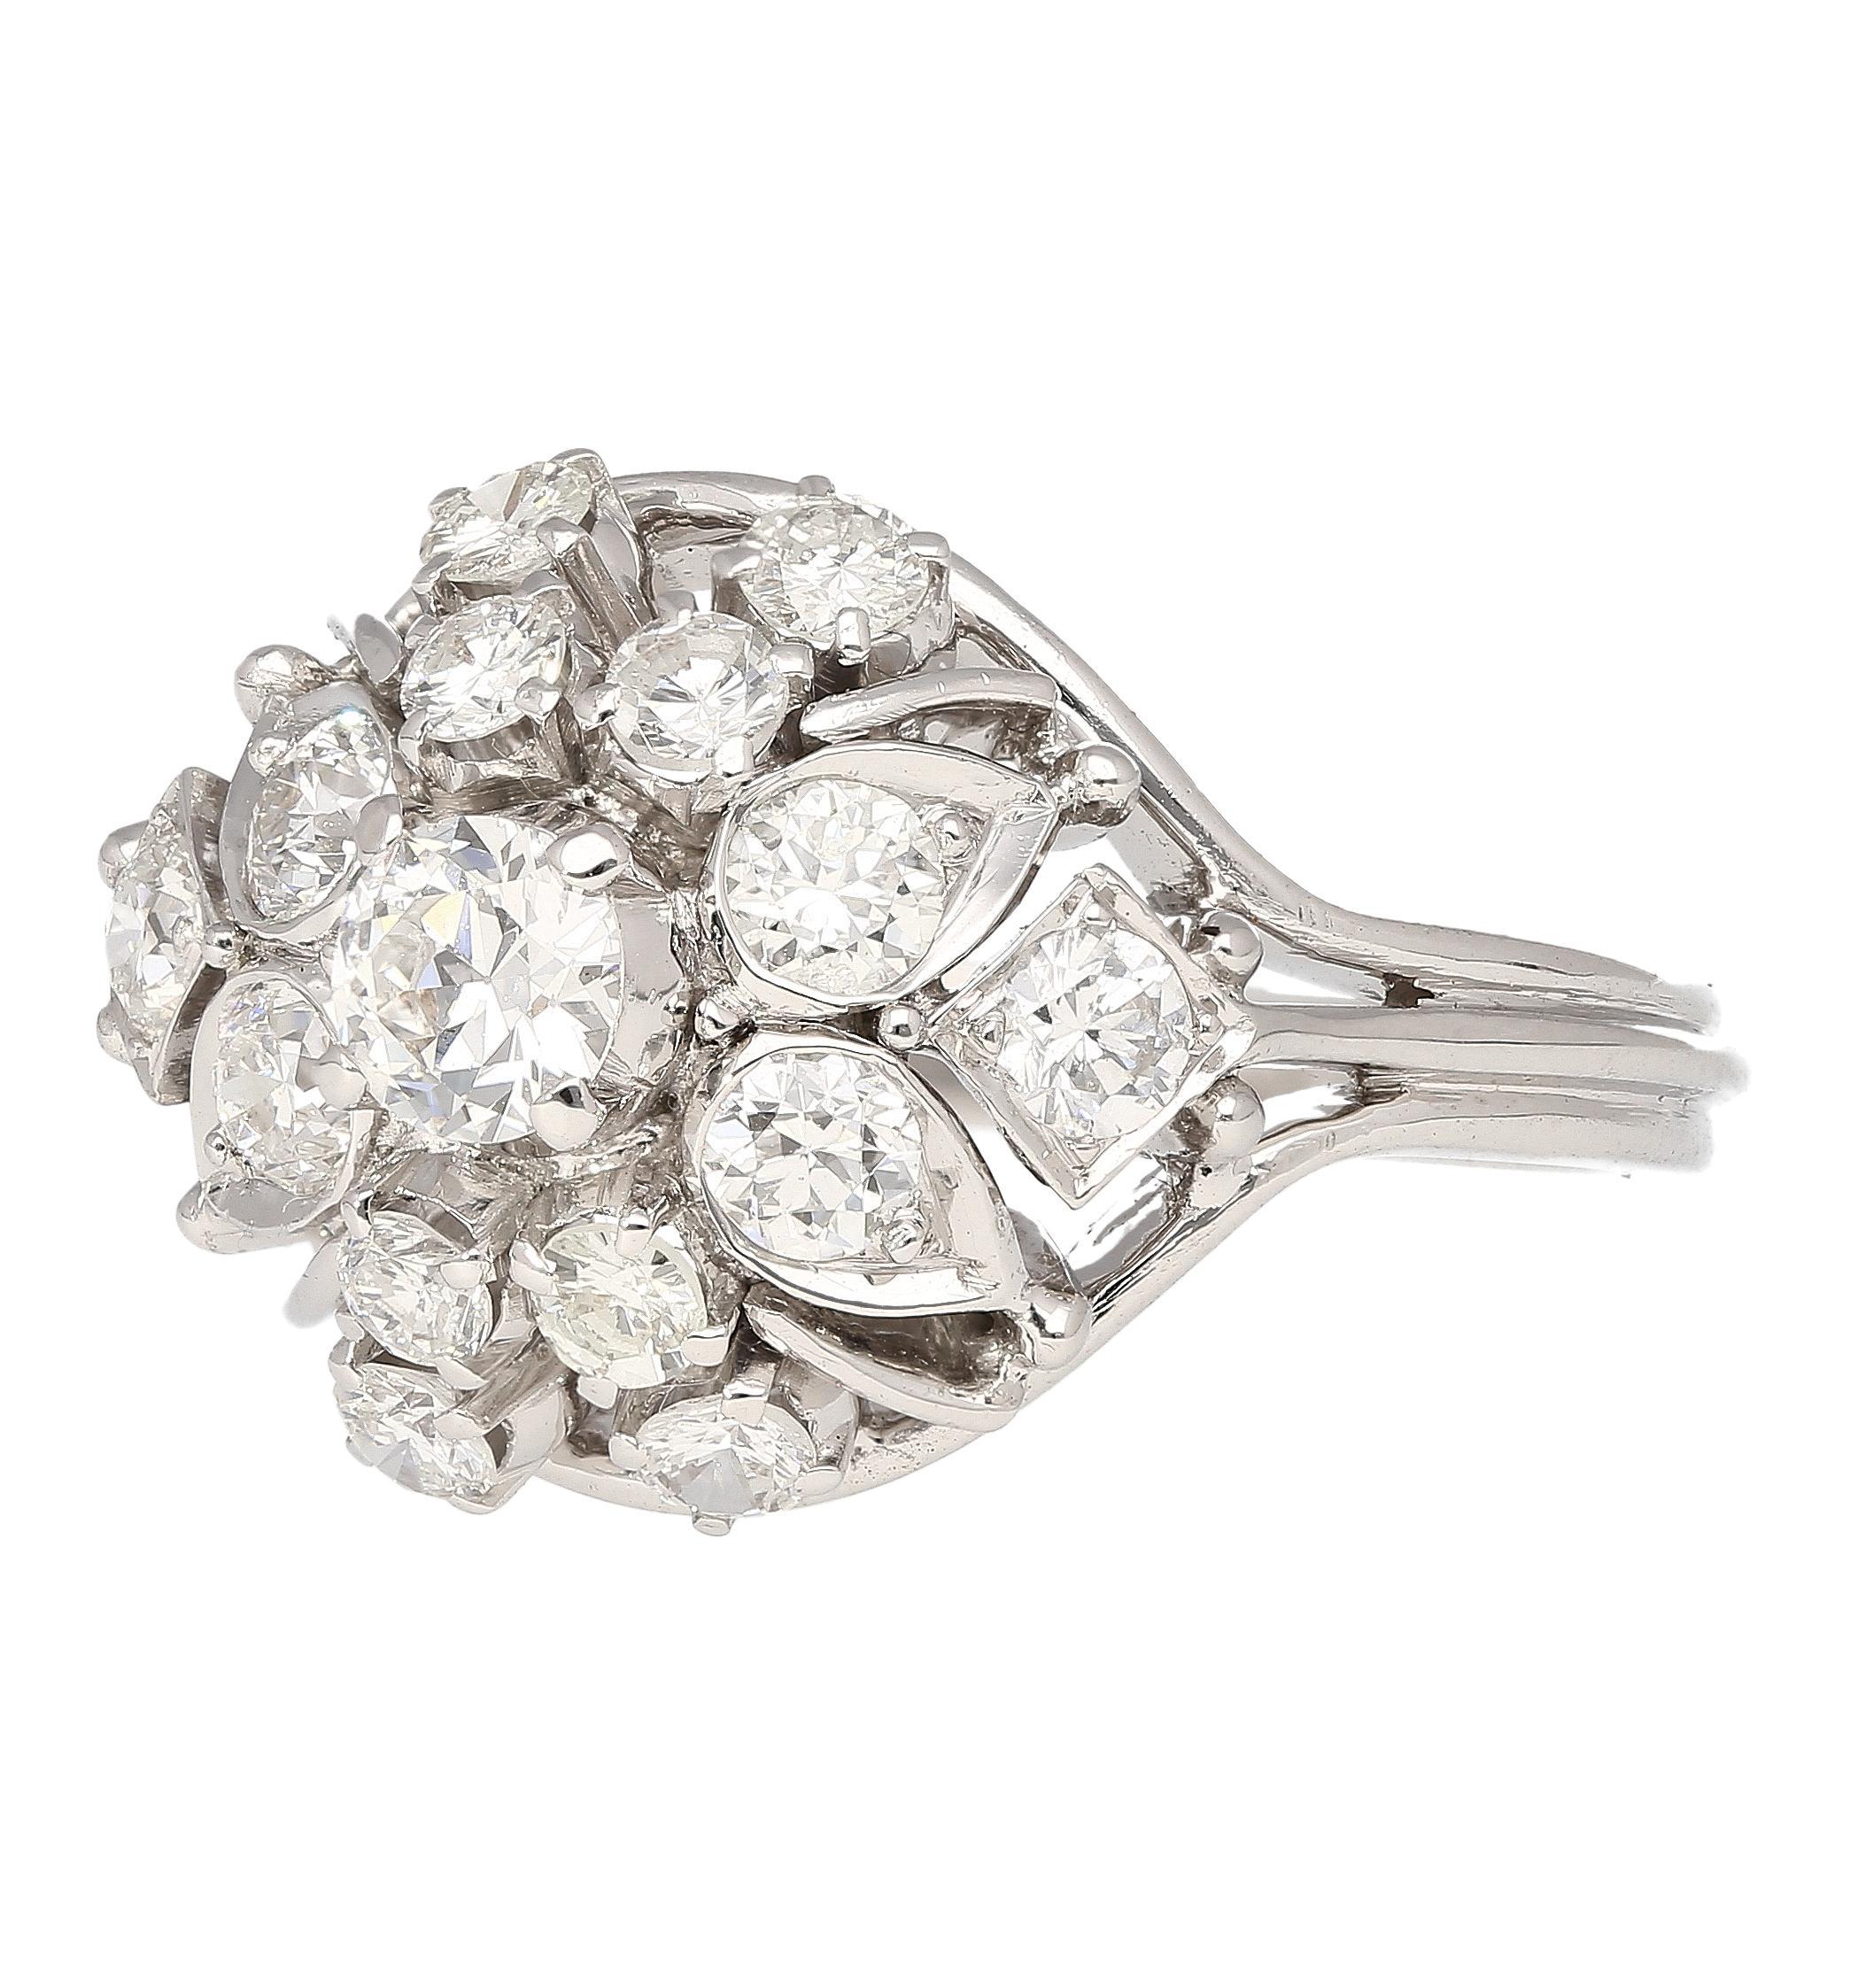 This captivating ring blends vintage charm with modern sparkle. A mesmerizing 0.30 carat, vintage old European cut diamond takes center stage. The center stone is embraced by a descending halo of 14 round diamonds of 1 carat tw. The intricate design